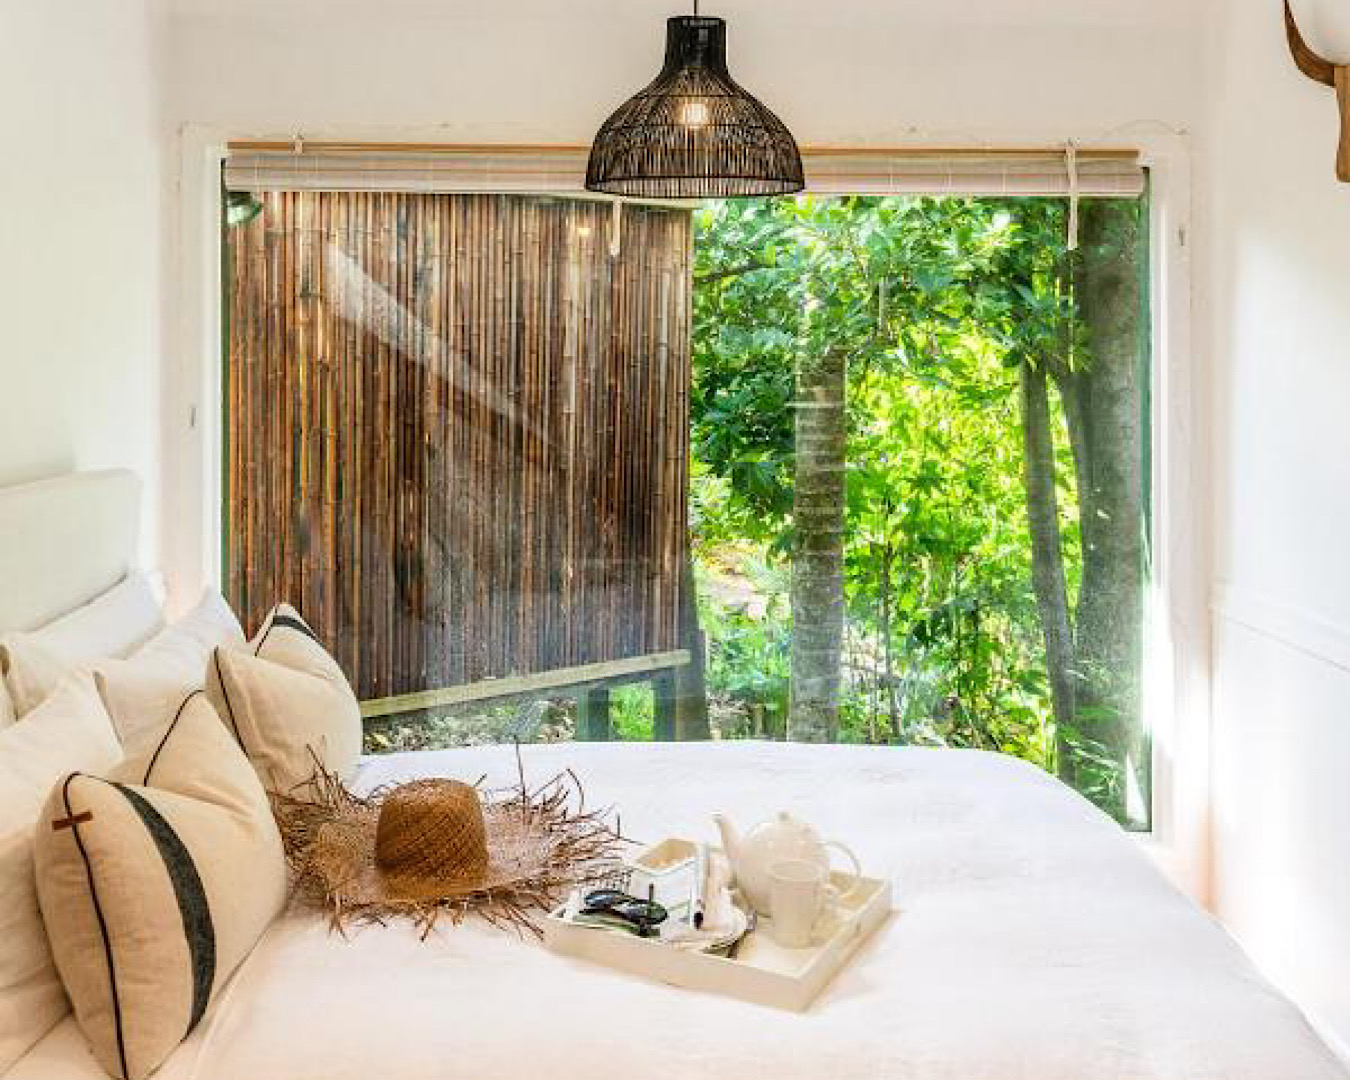 A large, cosy bed is dressed in white with a straw hat and tray with teapot and mug sitting on it. The far wall appears made of bamboo and opens out onto lush greenery. 